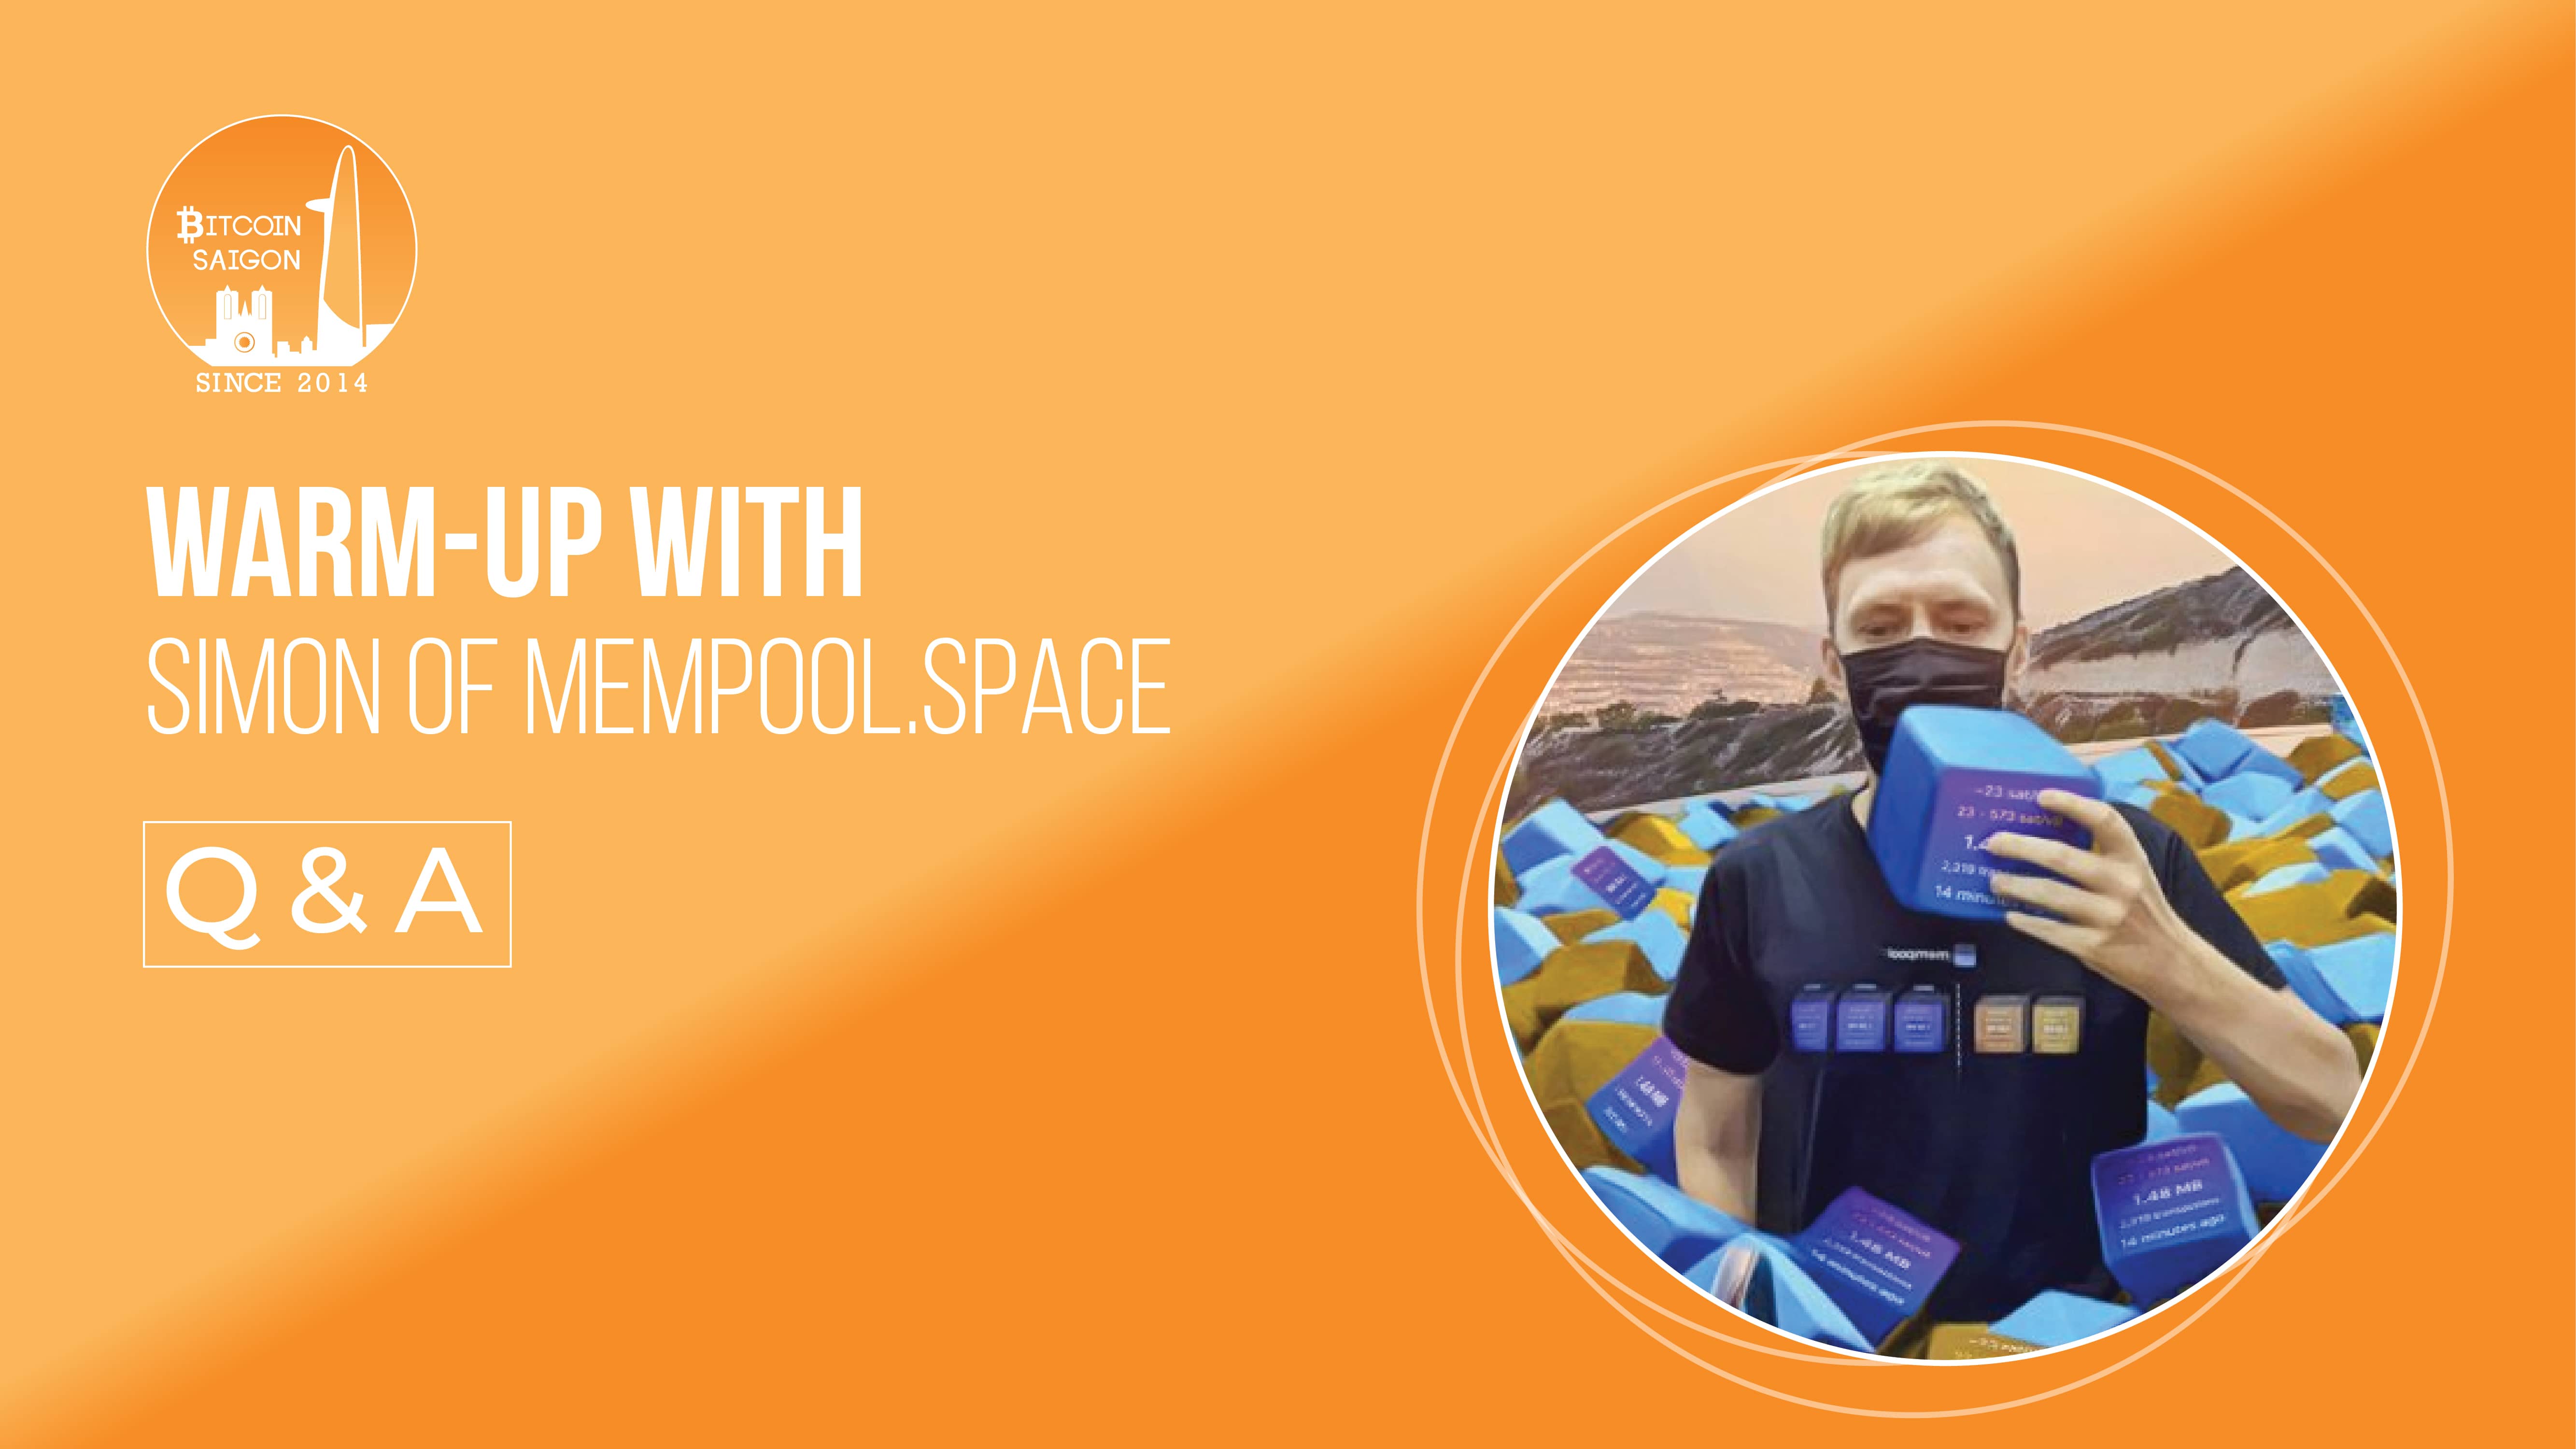 Warm-up with Simon of Mempool.Space